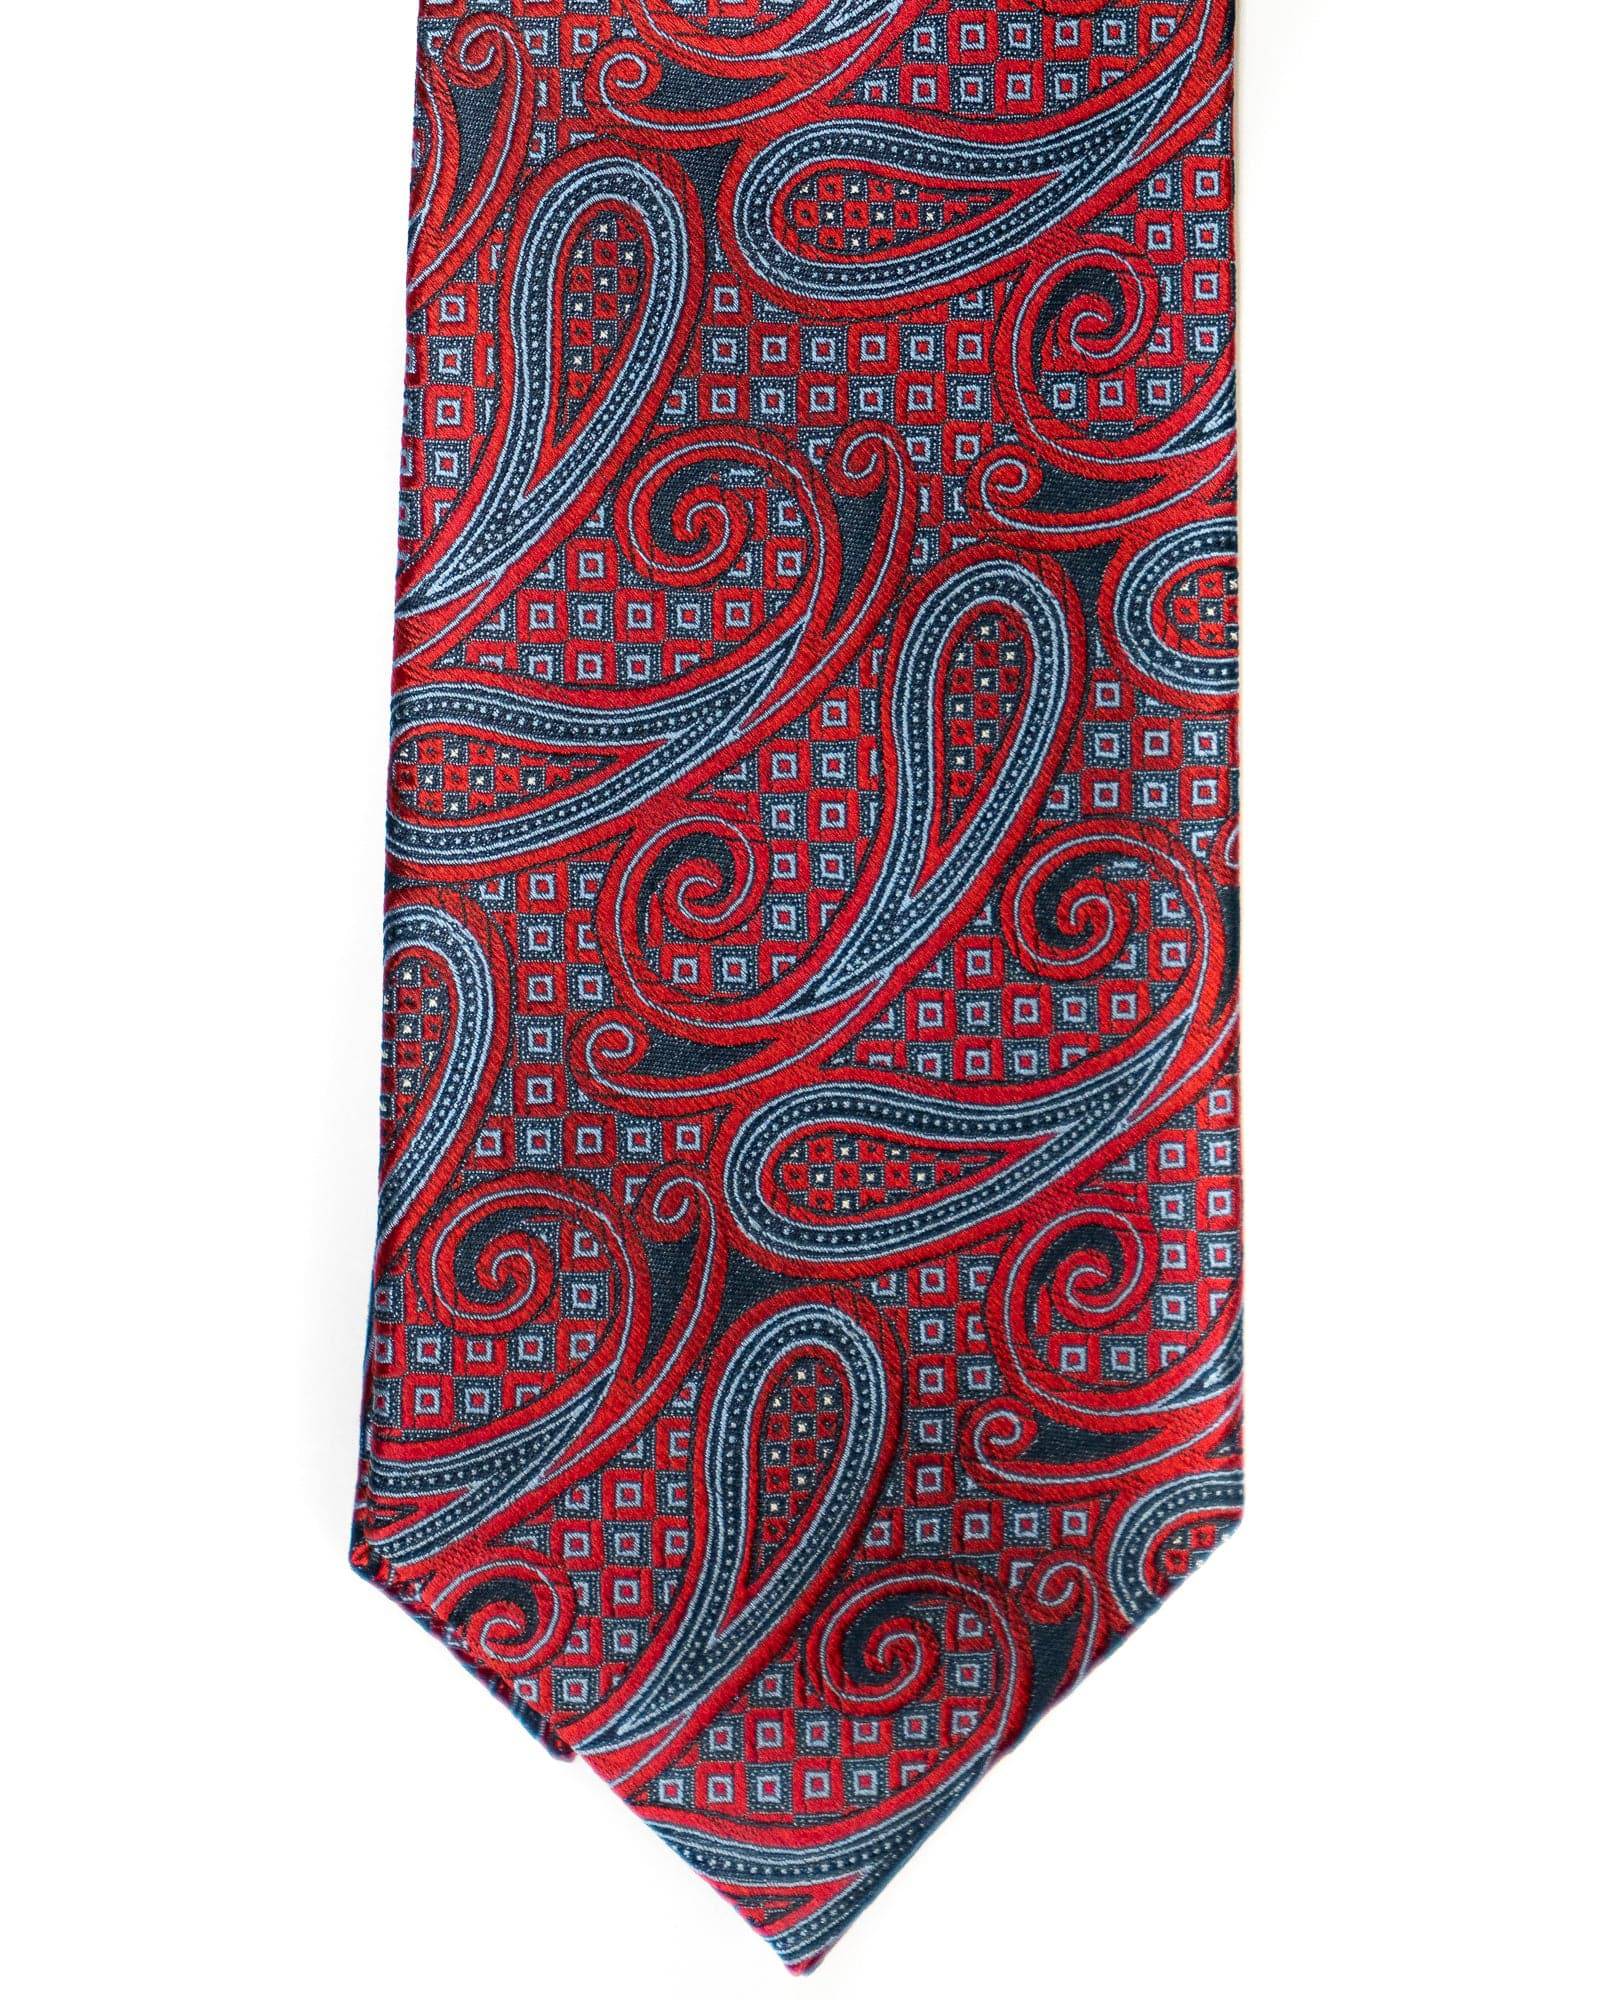 Paisley Silk Tie in Red With Navy - Rainwater's Men's Clothing and Tuxedo Rental